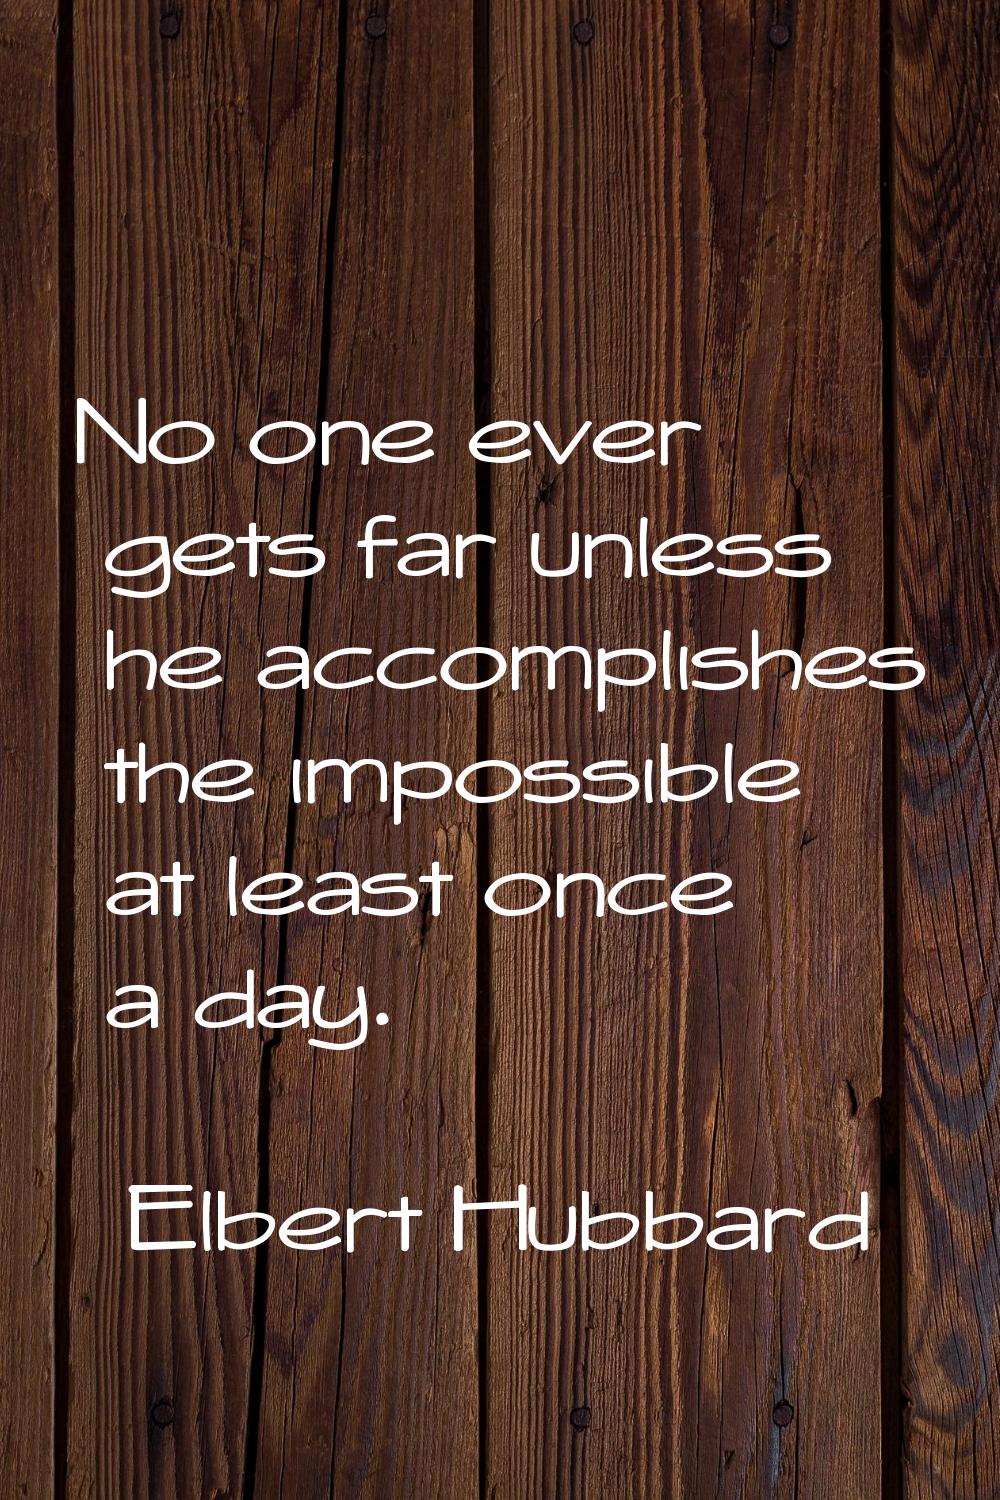 No one ever gets far unless he accomplishes the impossible at least once a day.